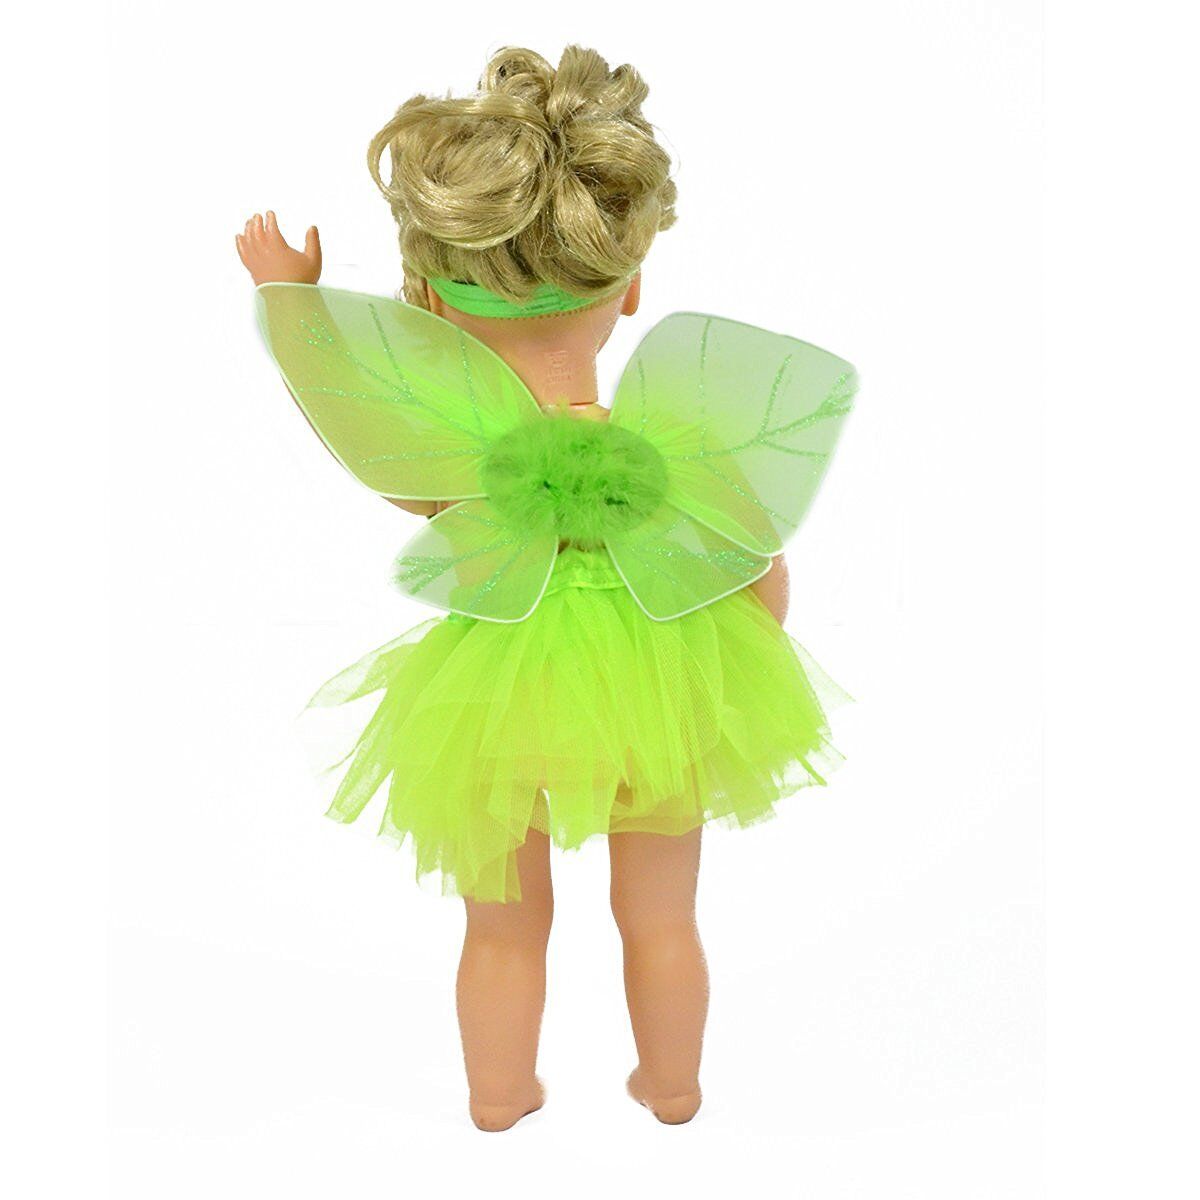 Green Fairy/Pixie Dress up Costume for Girls - Kids Matching Pretend Play Outfit The New York Doll Collection - фотография #4